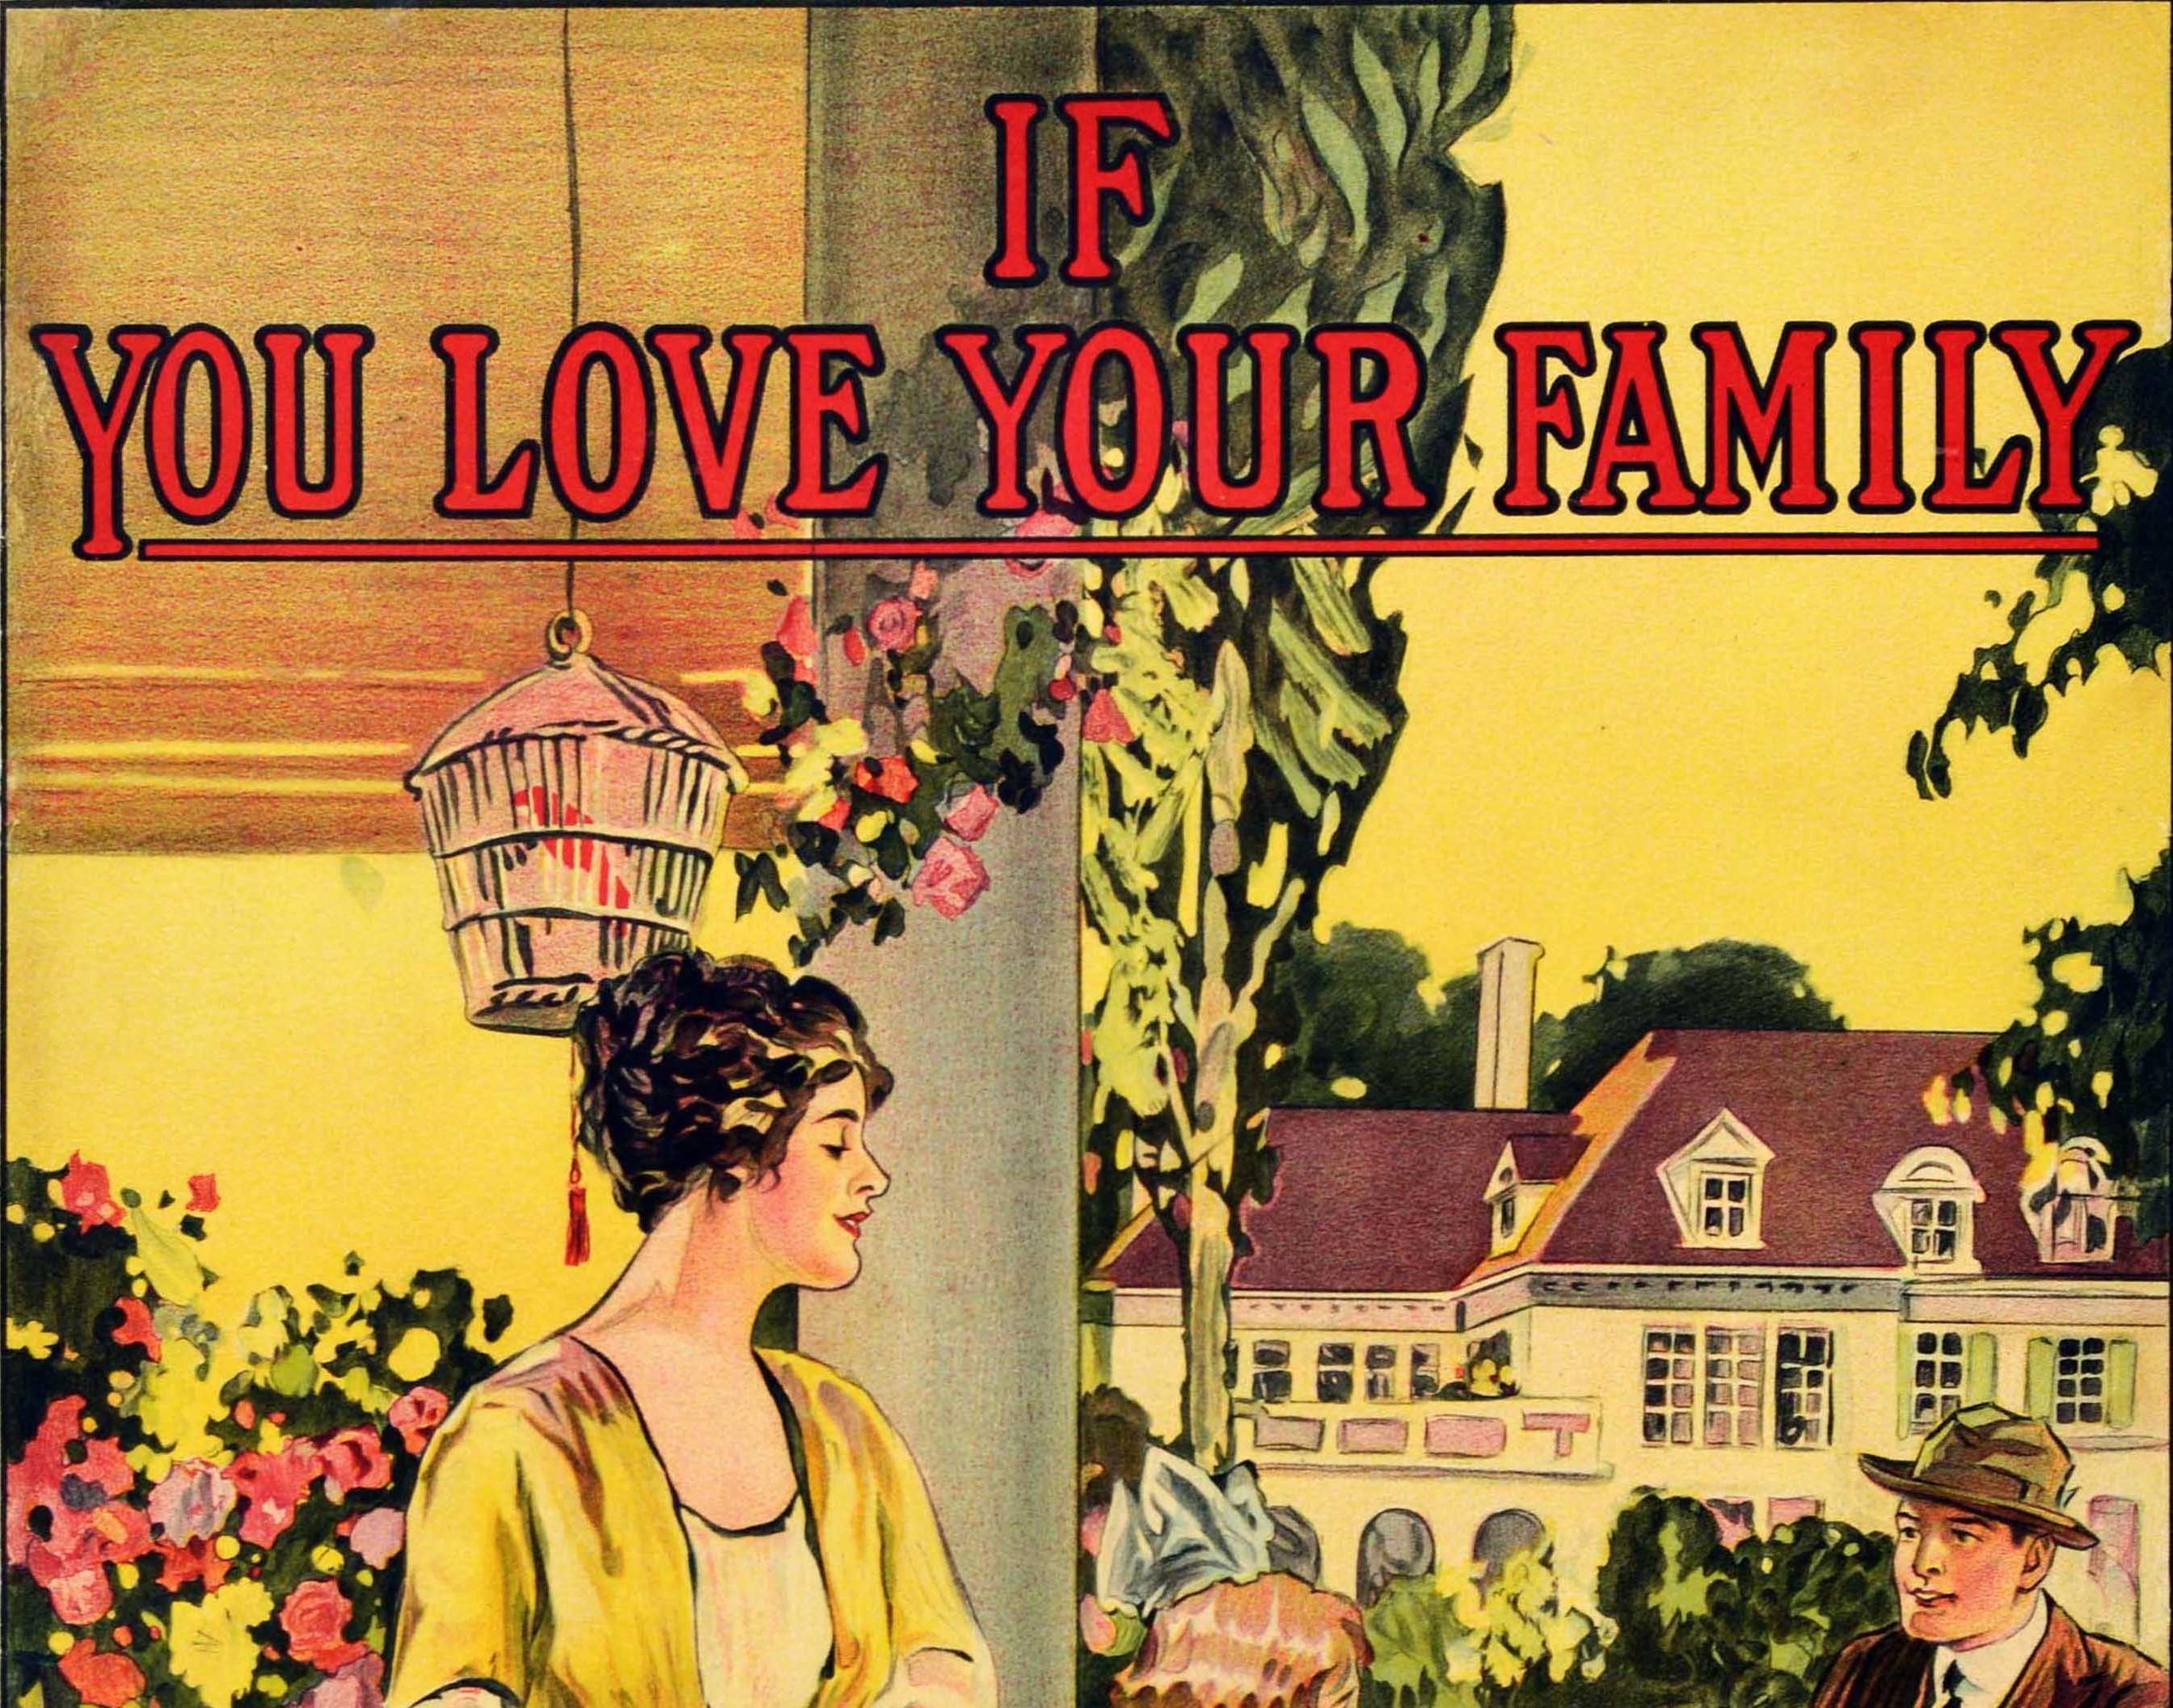 Original vintage advertising poster most likely printed for a real estate agency or a mortgage lender - If you love your family Own your home Let us tell you how - featuring a colourful design showing a happy family welcoming the father back home